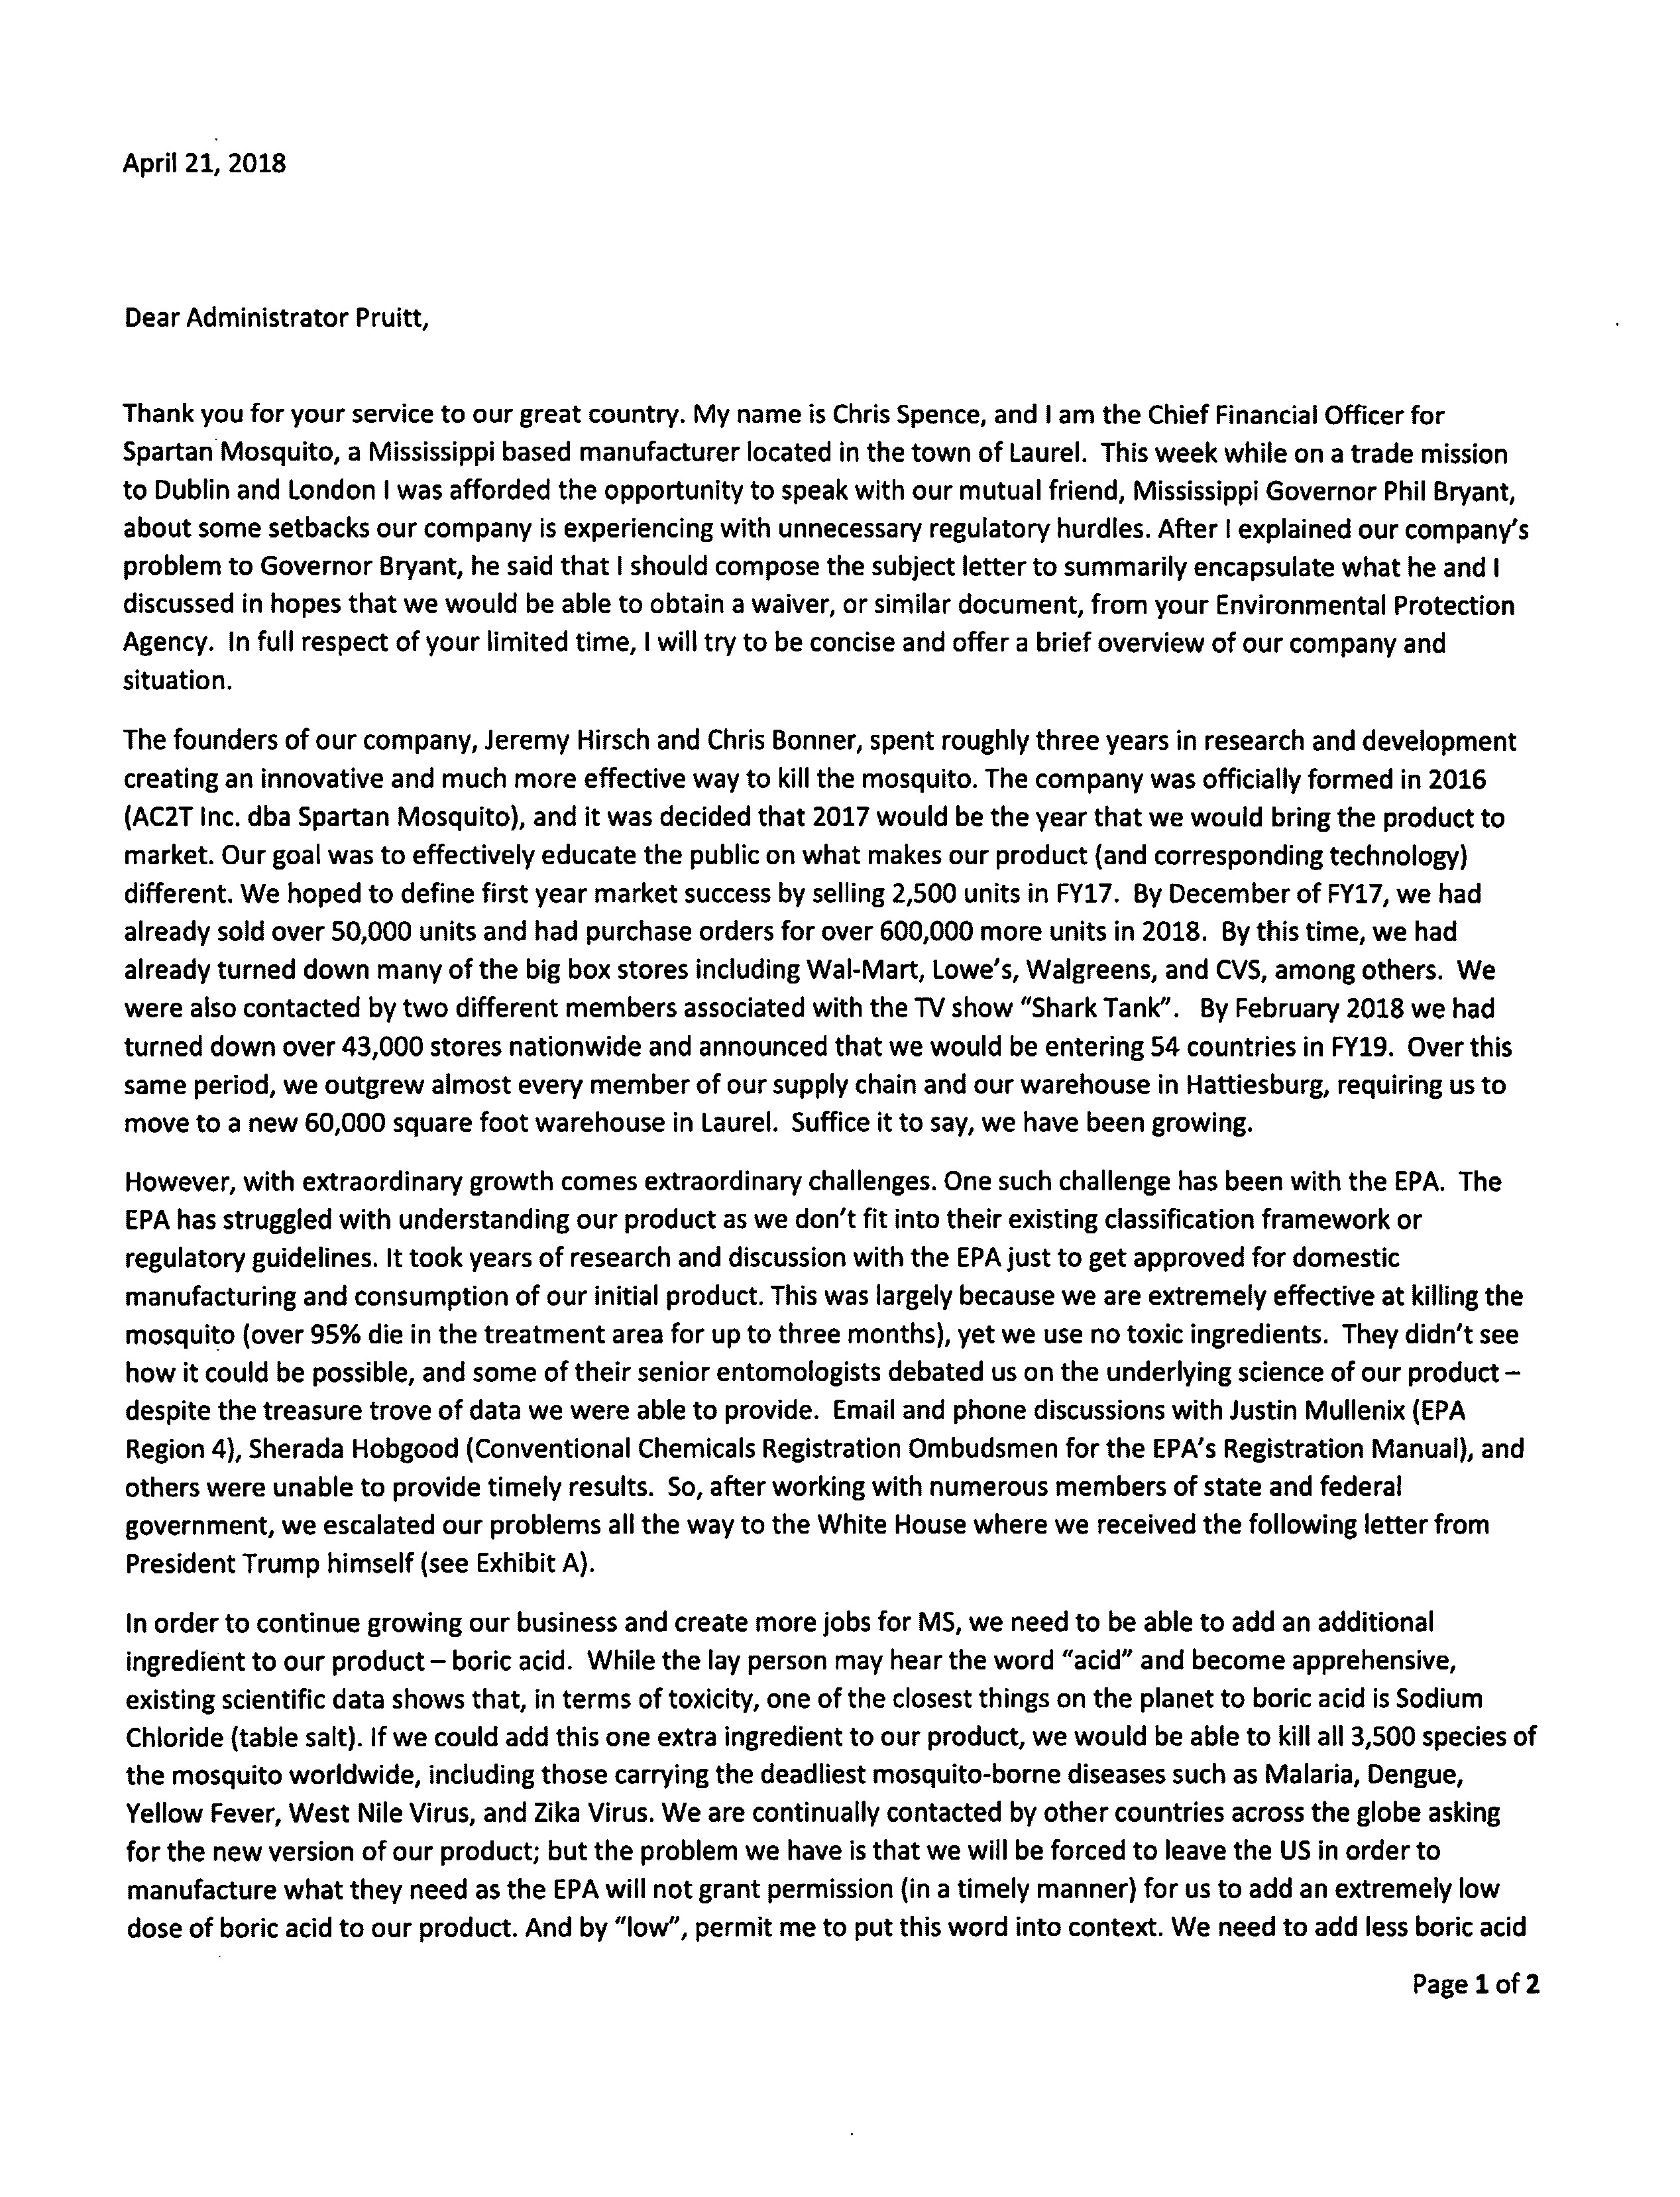 Letter from Chris Spence of Spartan Mosquito to Scott Pruitt of the EPA asking for a waiver from pesticide testing requirements. Page 1 of 2.